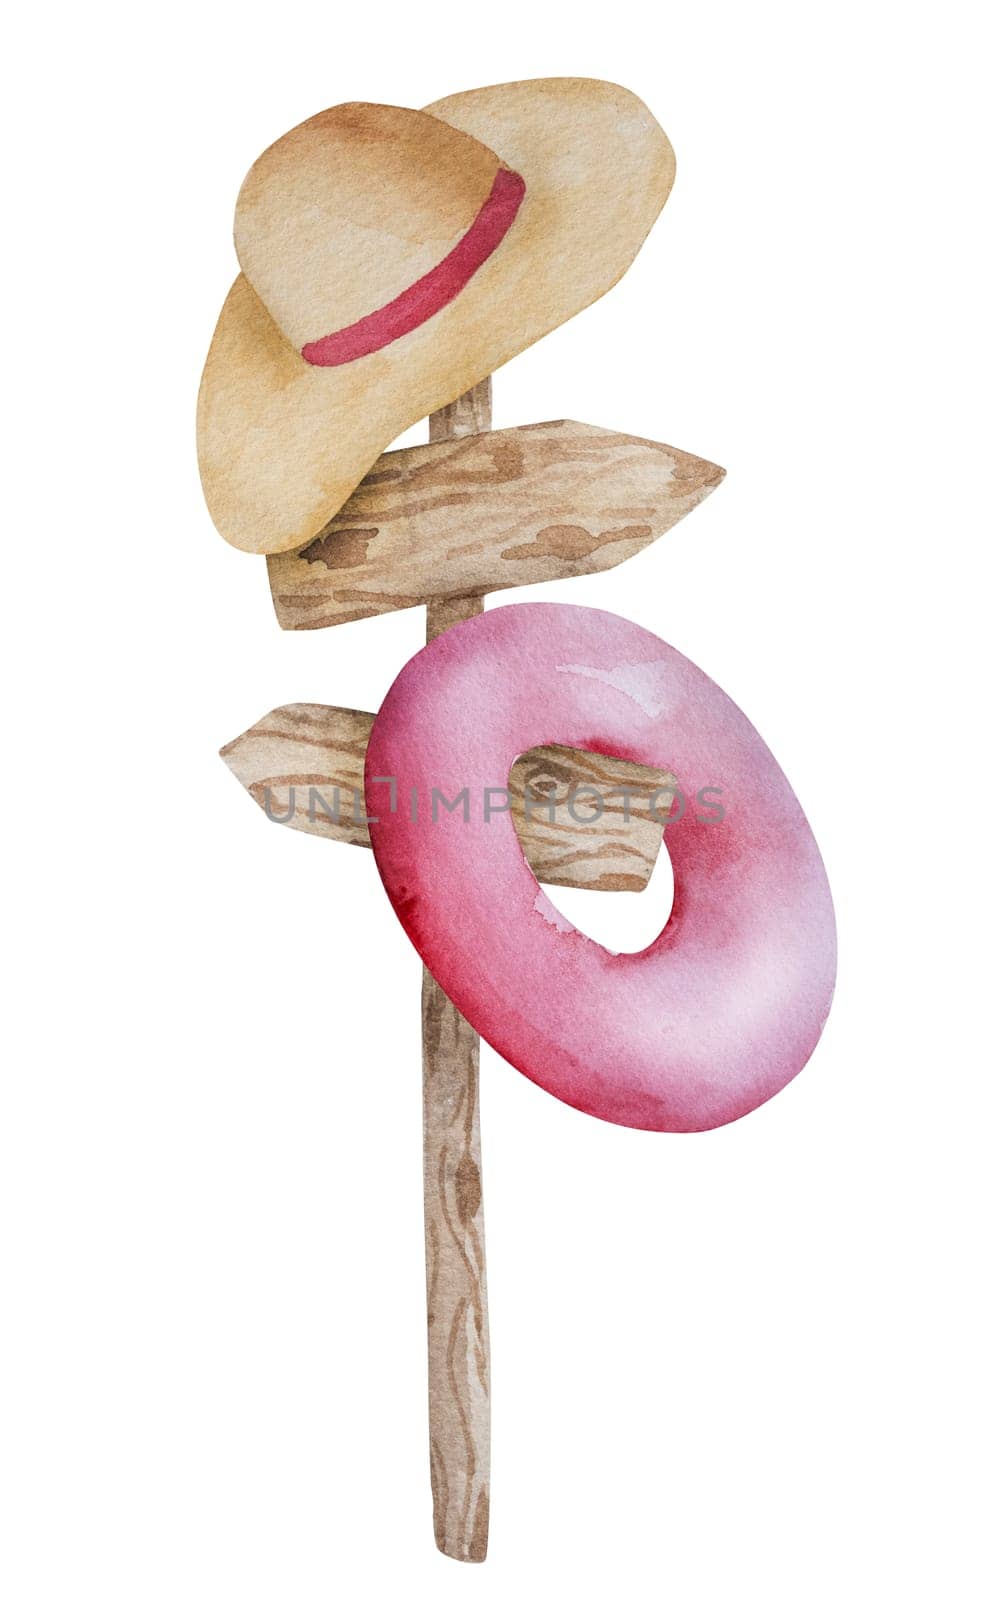 Hand-Drawn Illustration Of Summer Theme Featuring Wooden Signpost With Hanging Hat And Swimming Ring by tan4ikk1